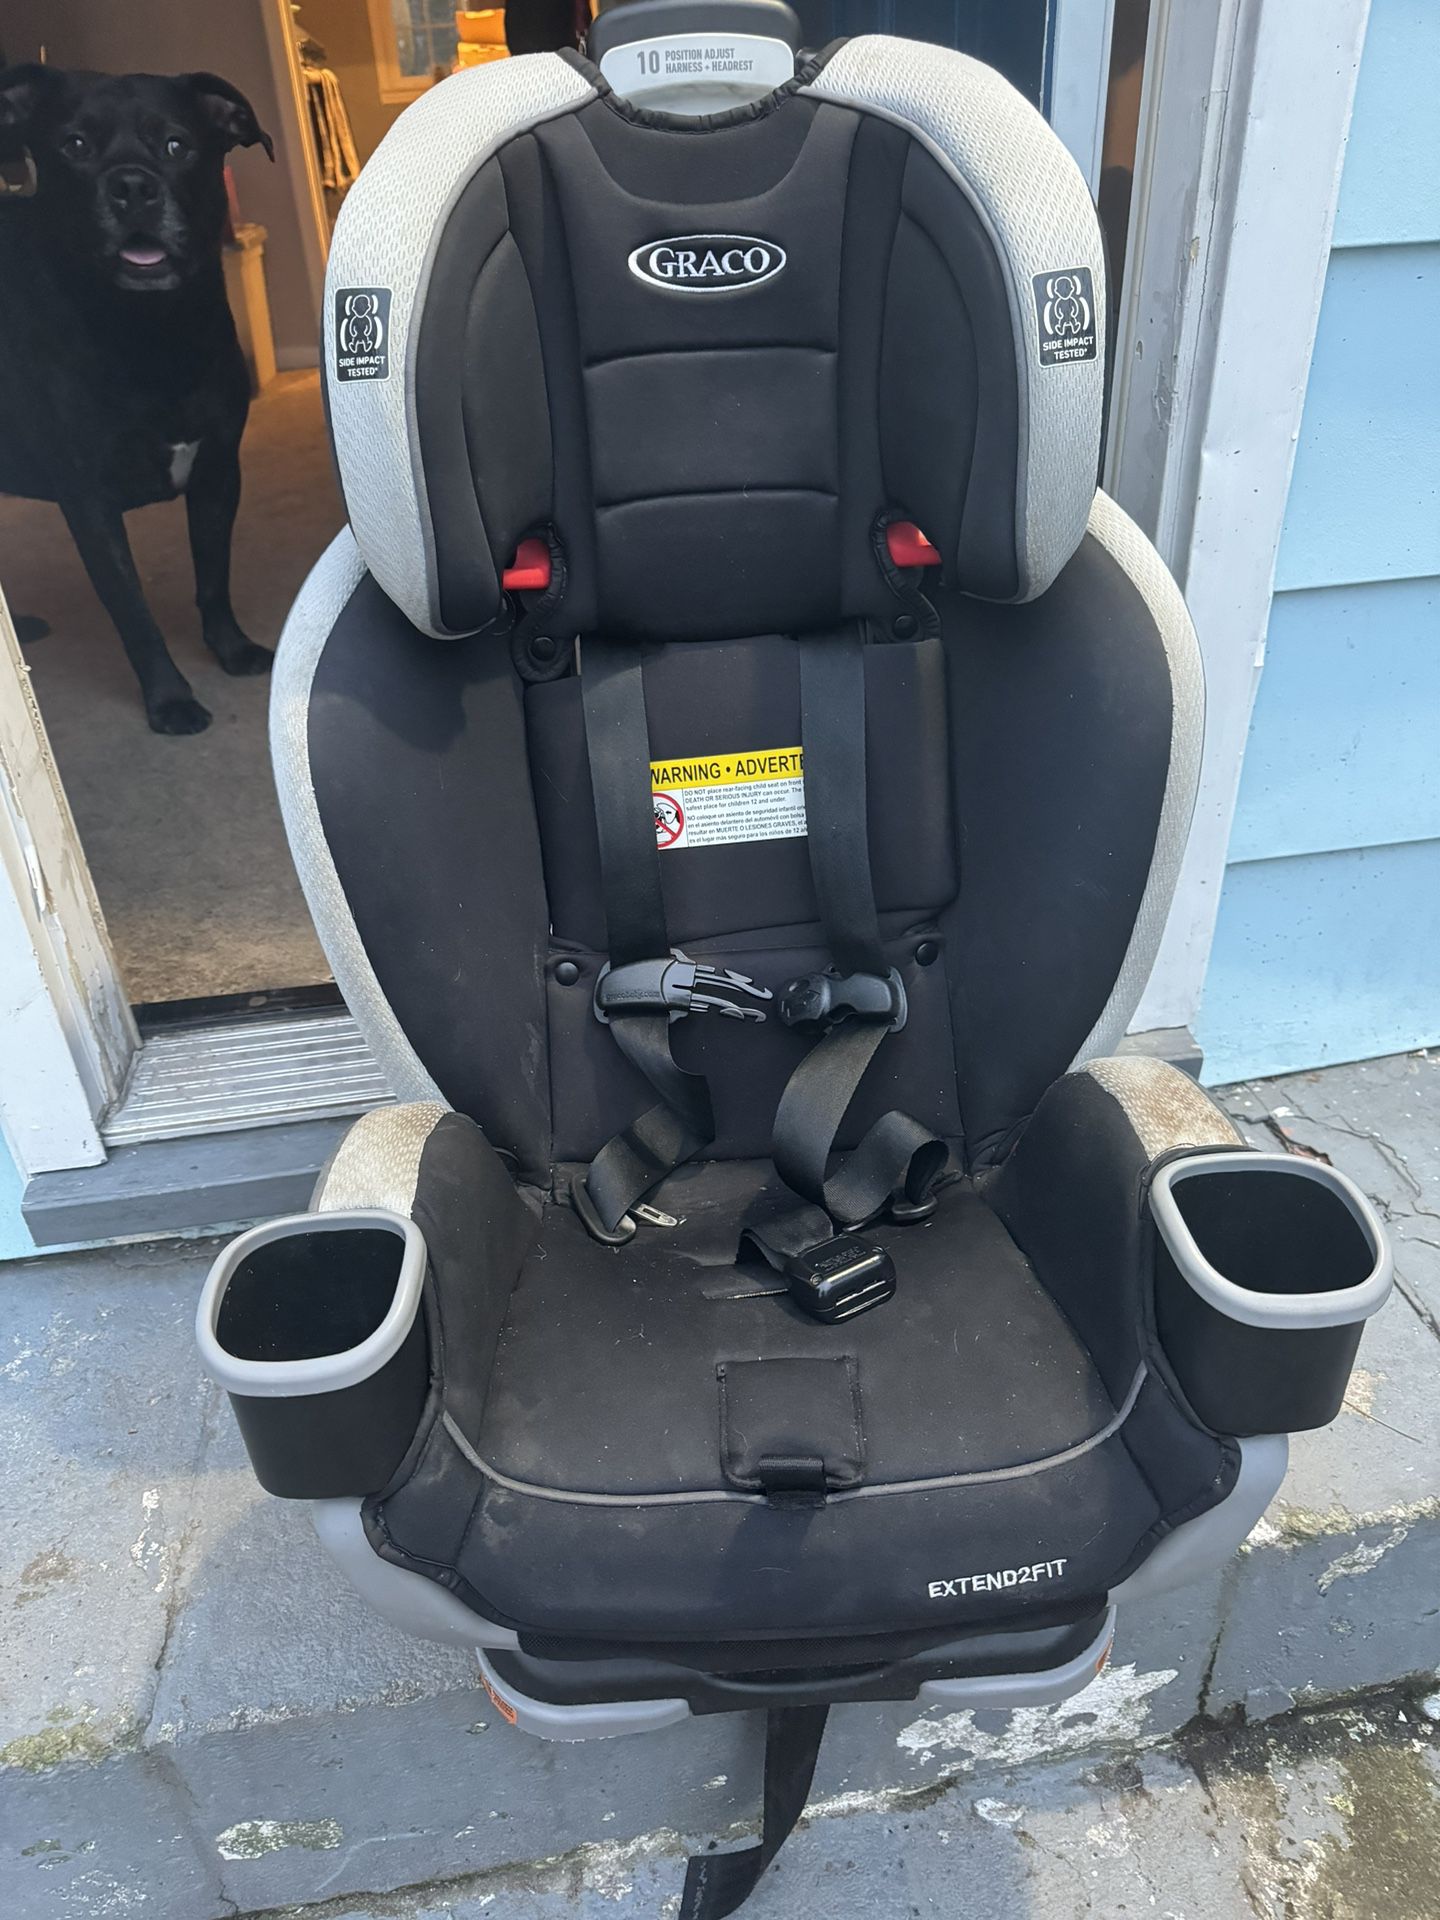 Graco Extended2Fit Carseat